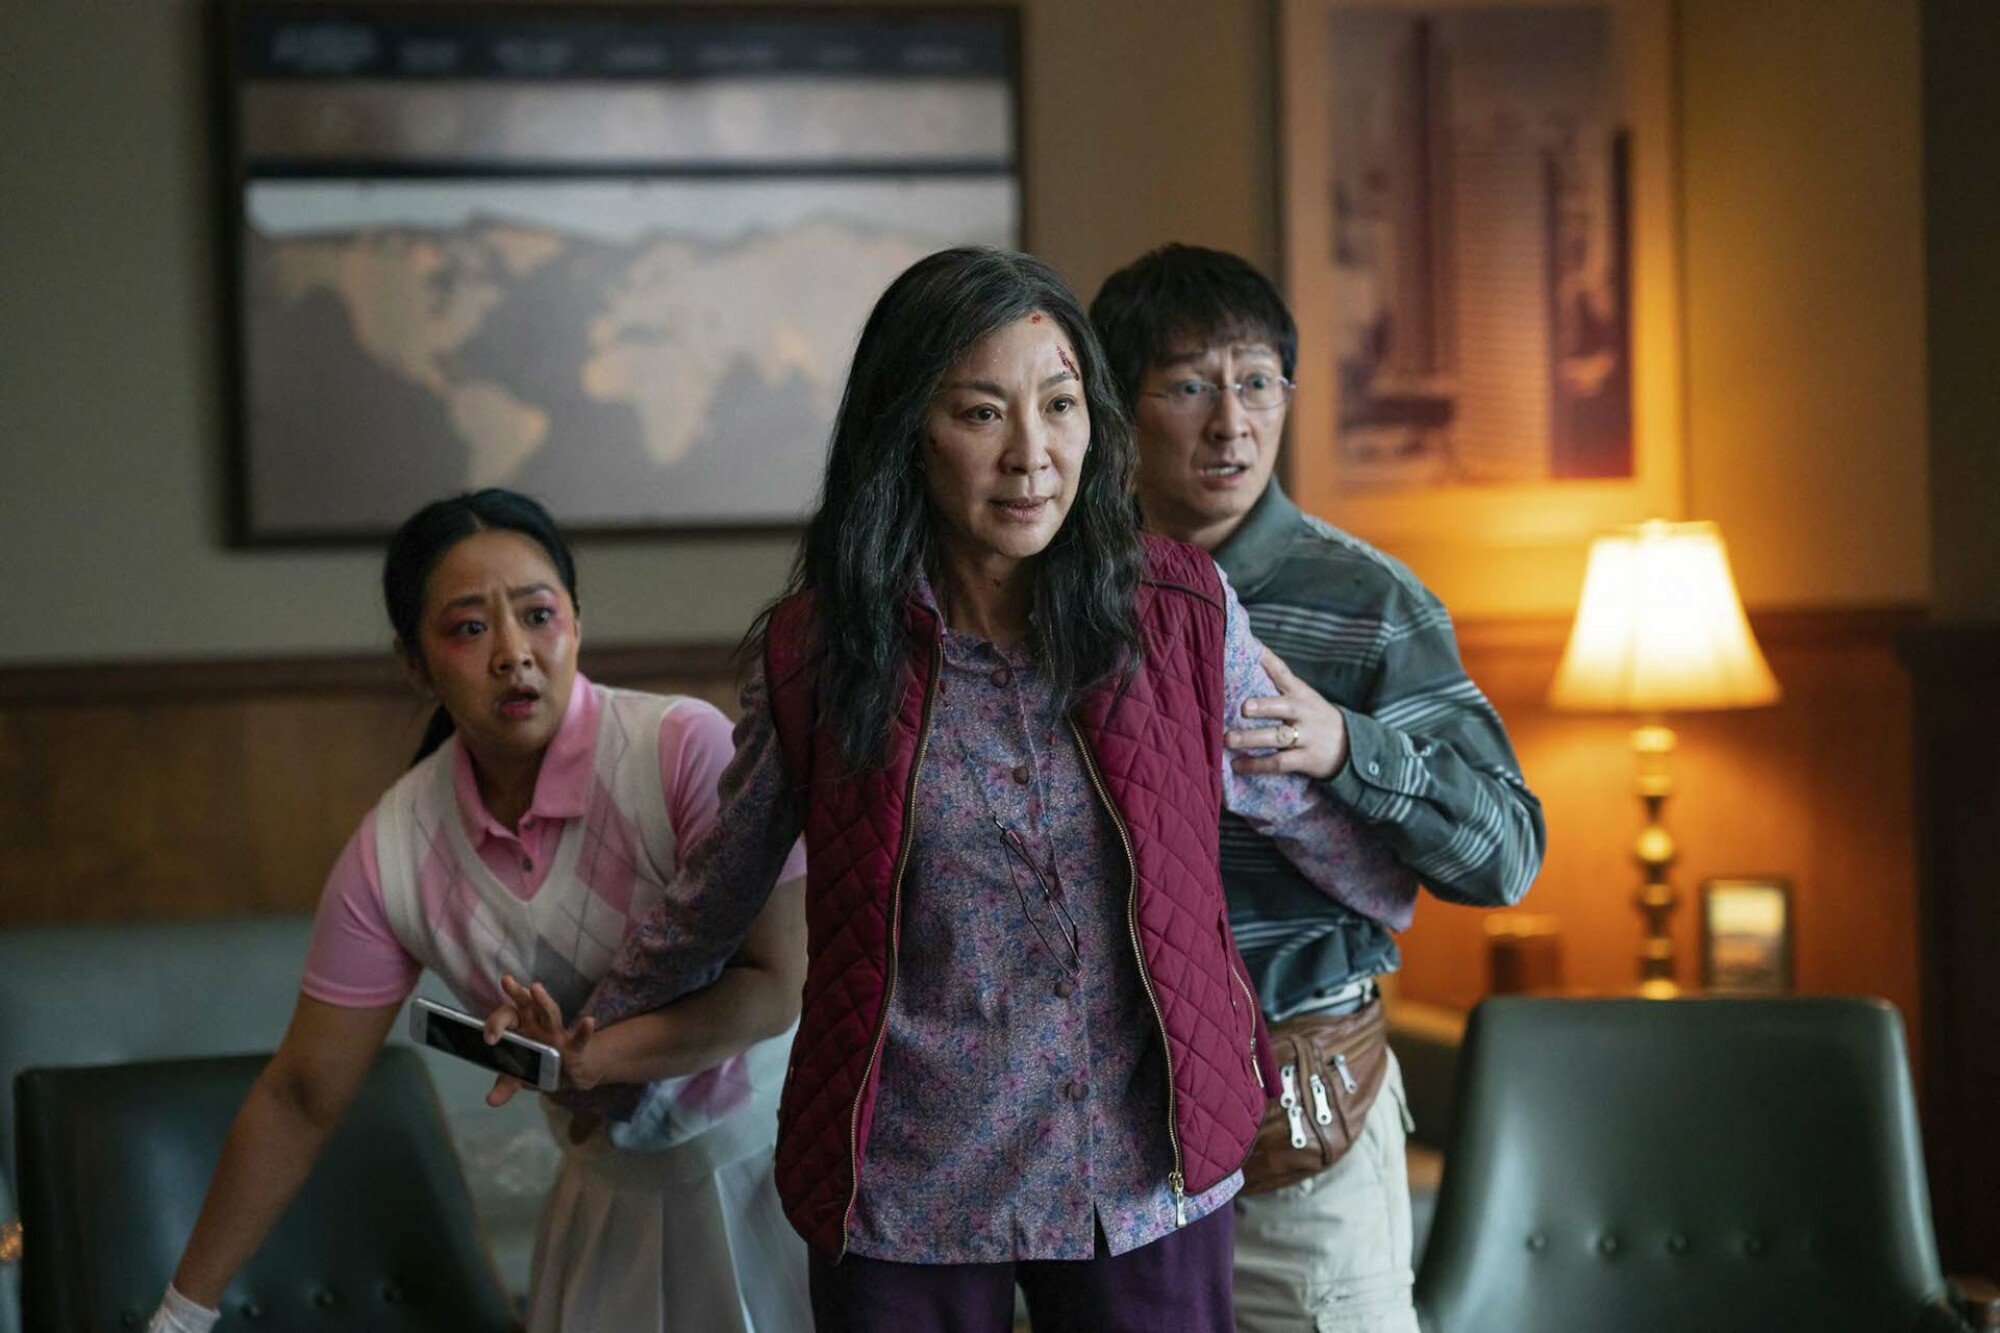 An Asian woman holds her husband and daughter back; they look scared while she looks determined.